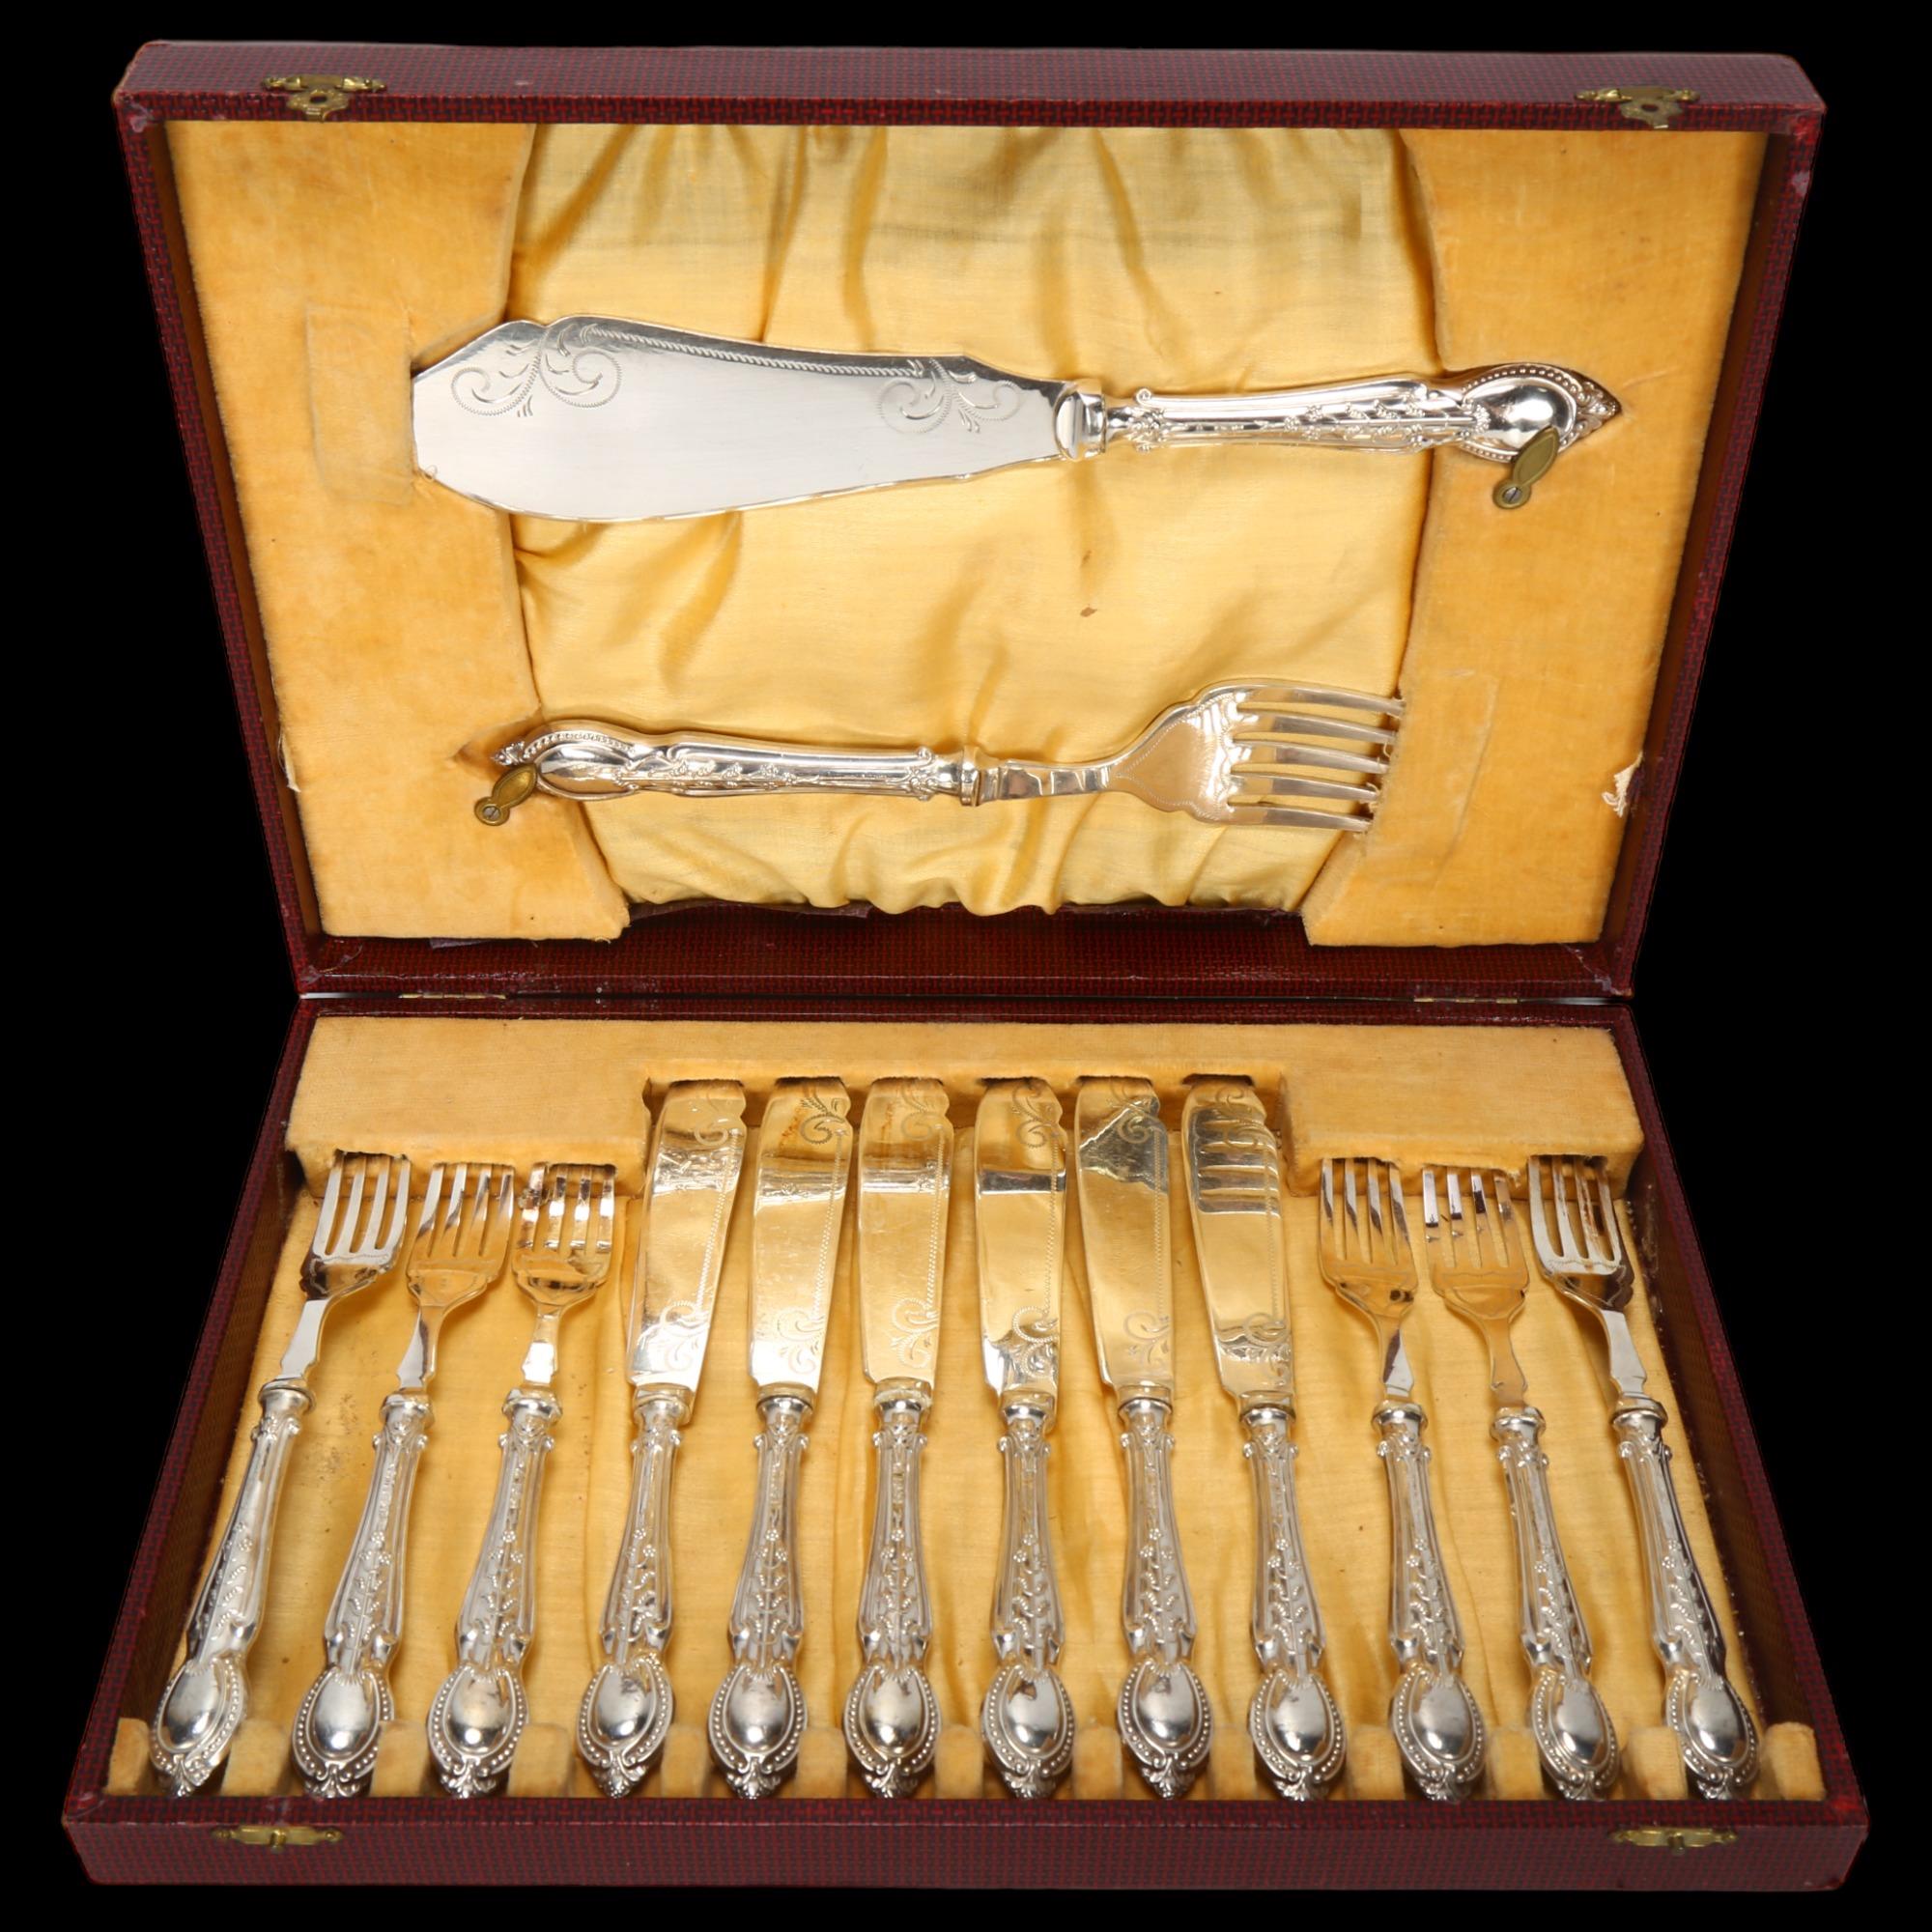 A cased set of George V silver-handled fish cutlery for 6 people, C H Beatson, Sheffield 1929, knife